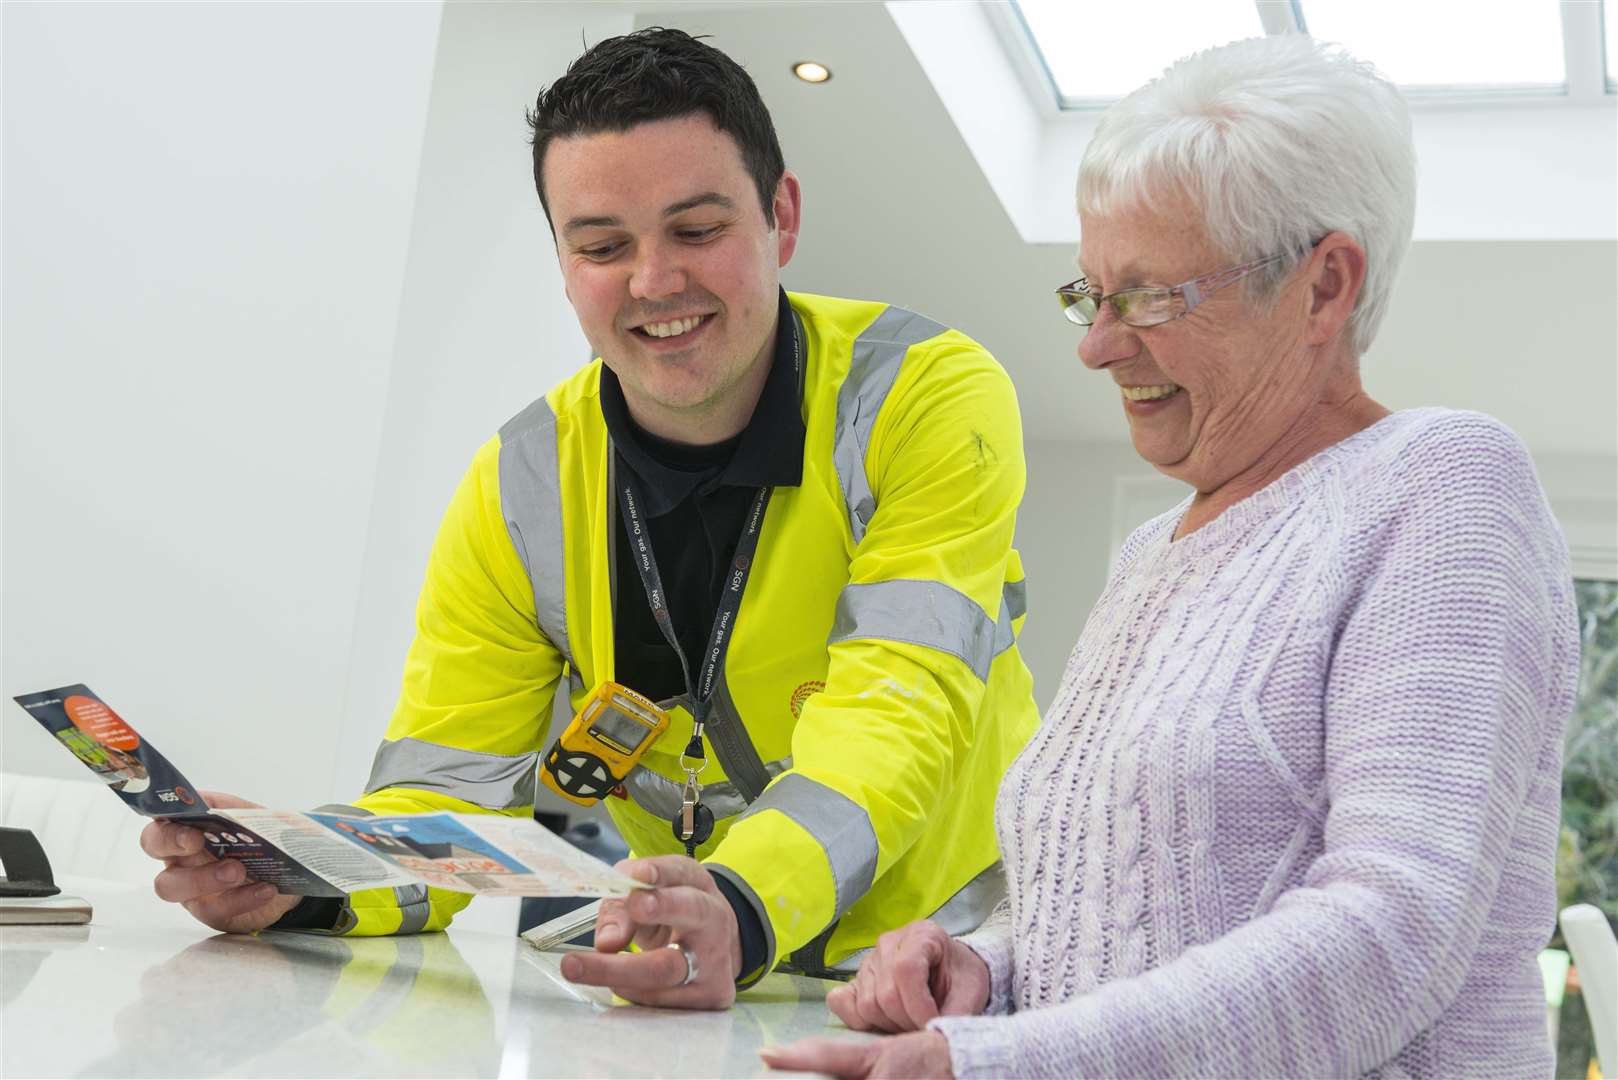 Age Scotland and SGN have teamed up to offer an energy support service for older people.